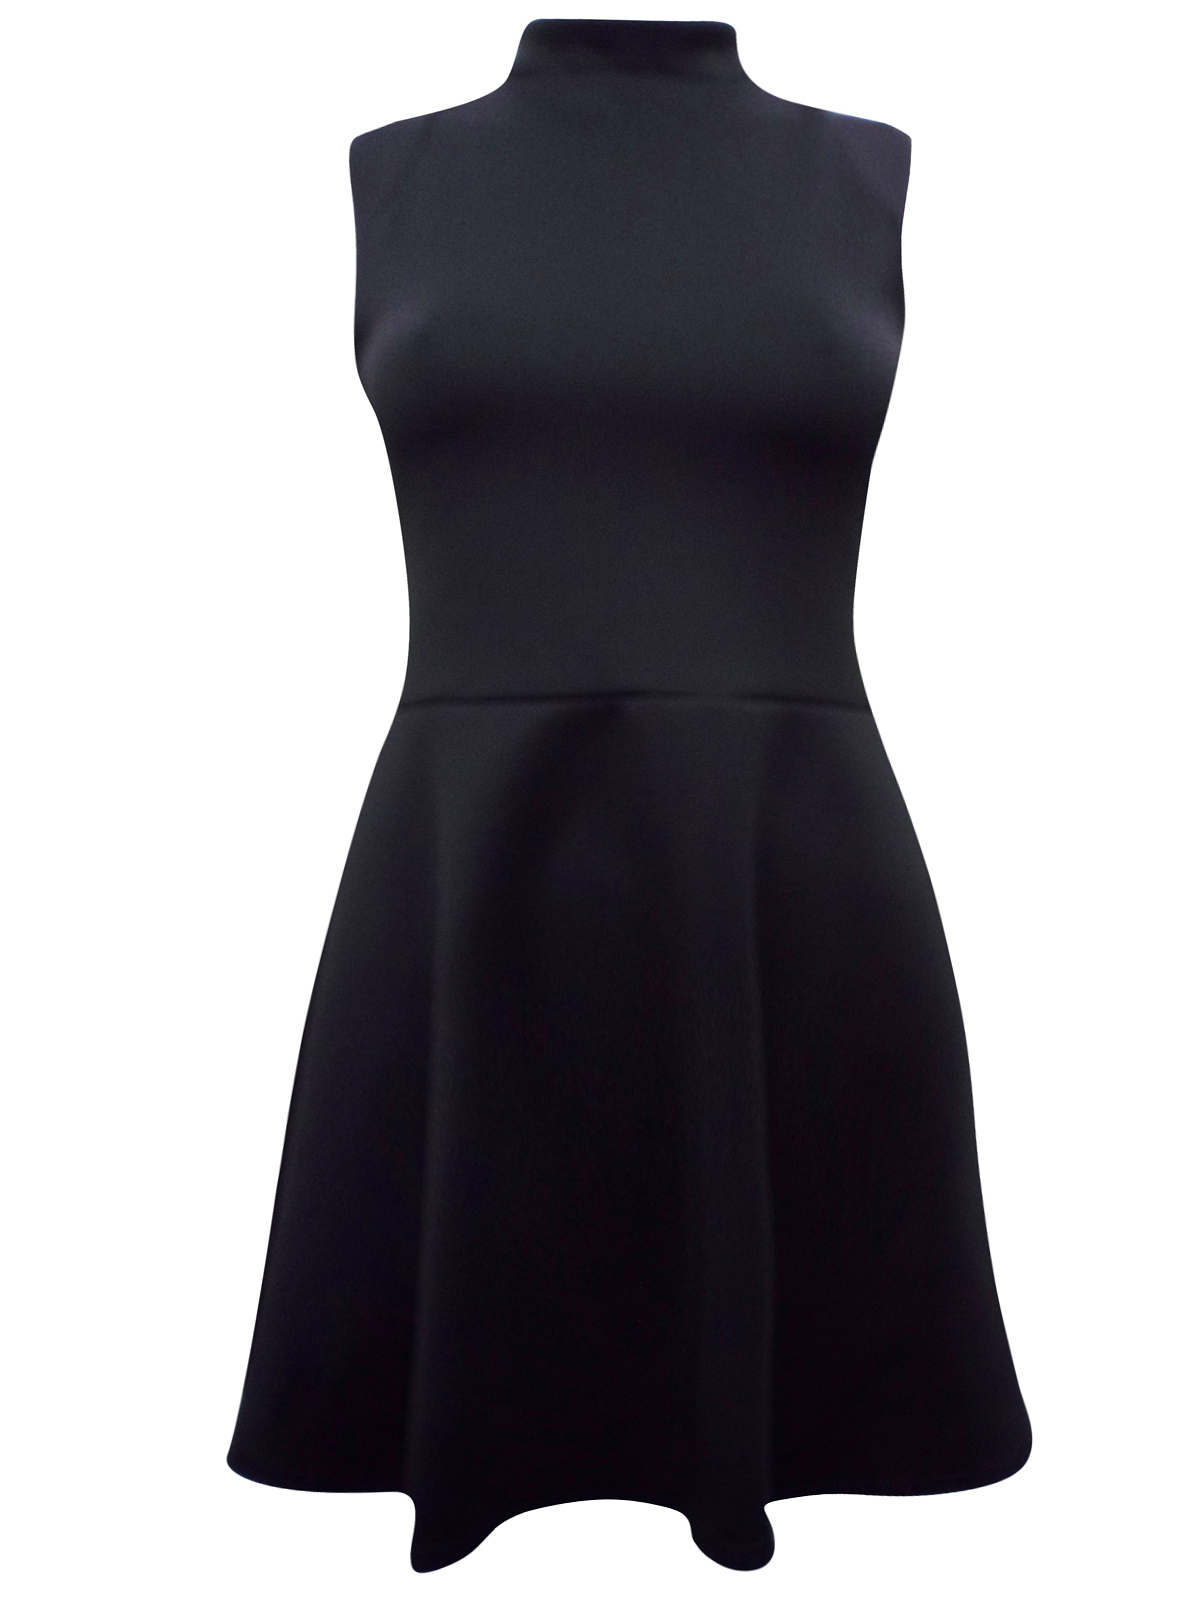 BLACK Assorted Ladies Bodycon & Skater Dresses - Size 8 to 14